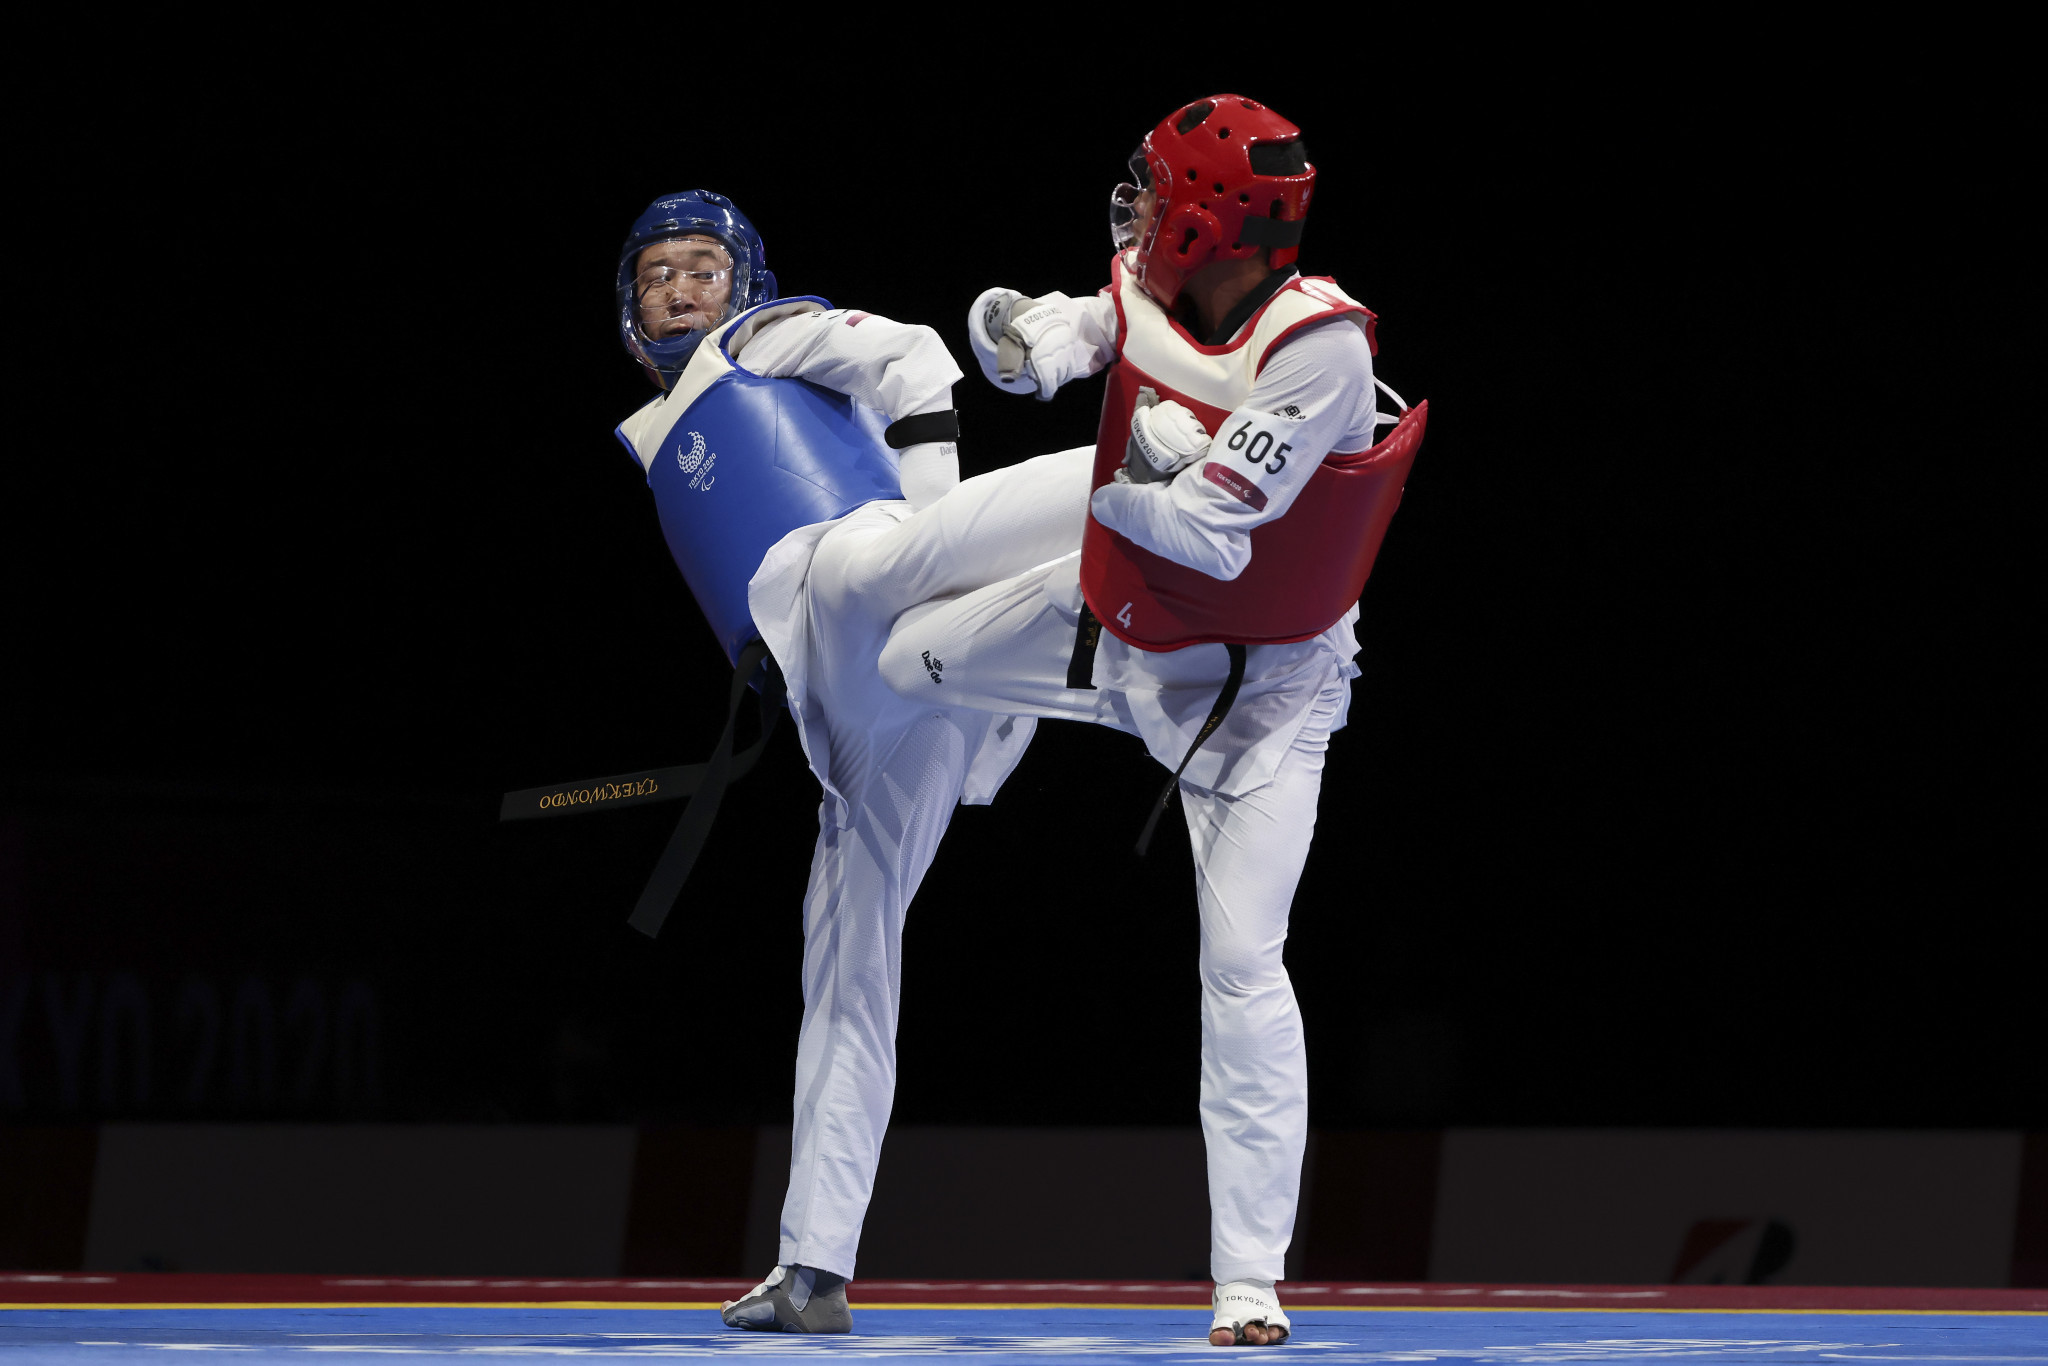 Chelbat reflects on "great year of achievements" for Para taekwondo and looks forward to Paris 2024